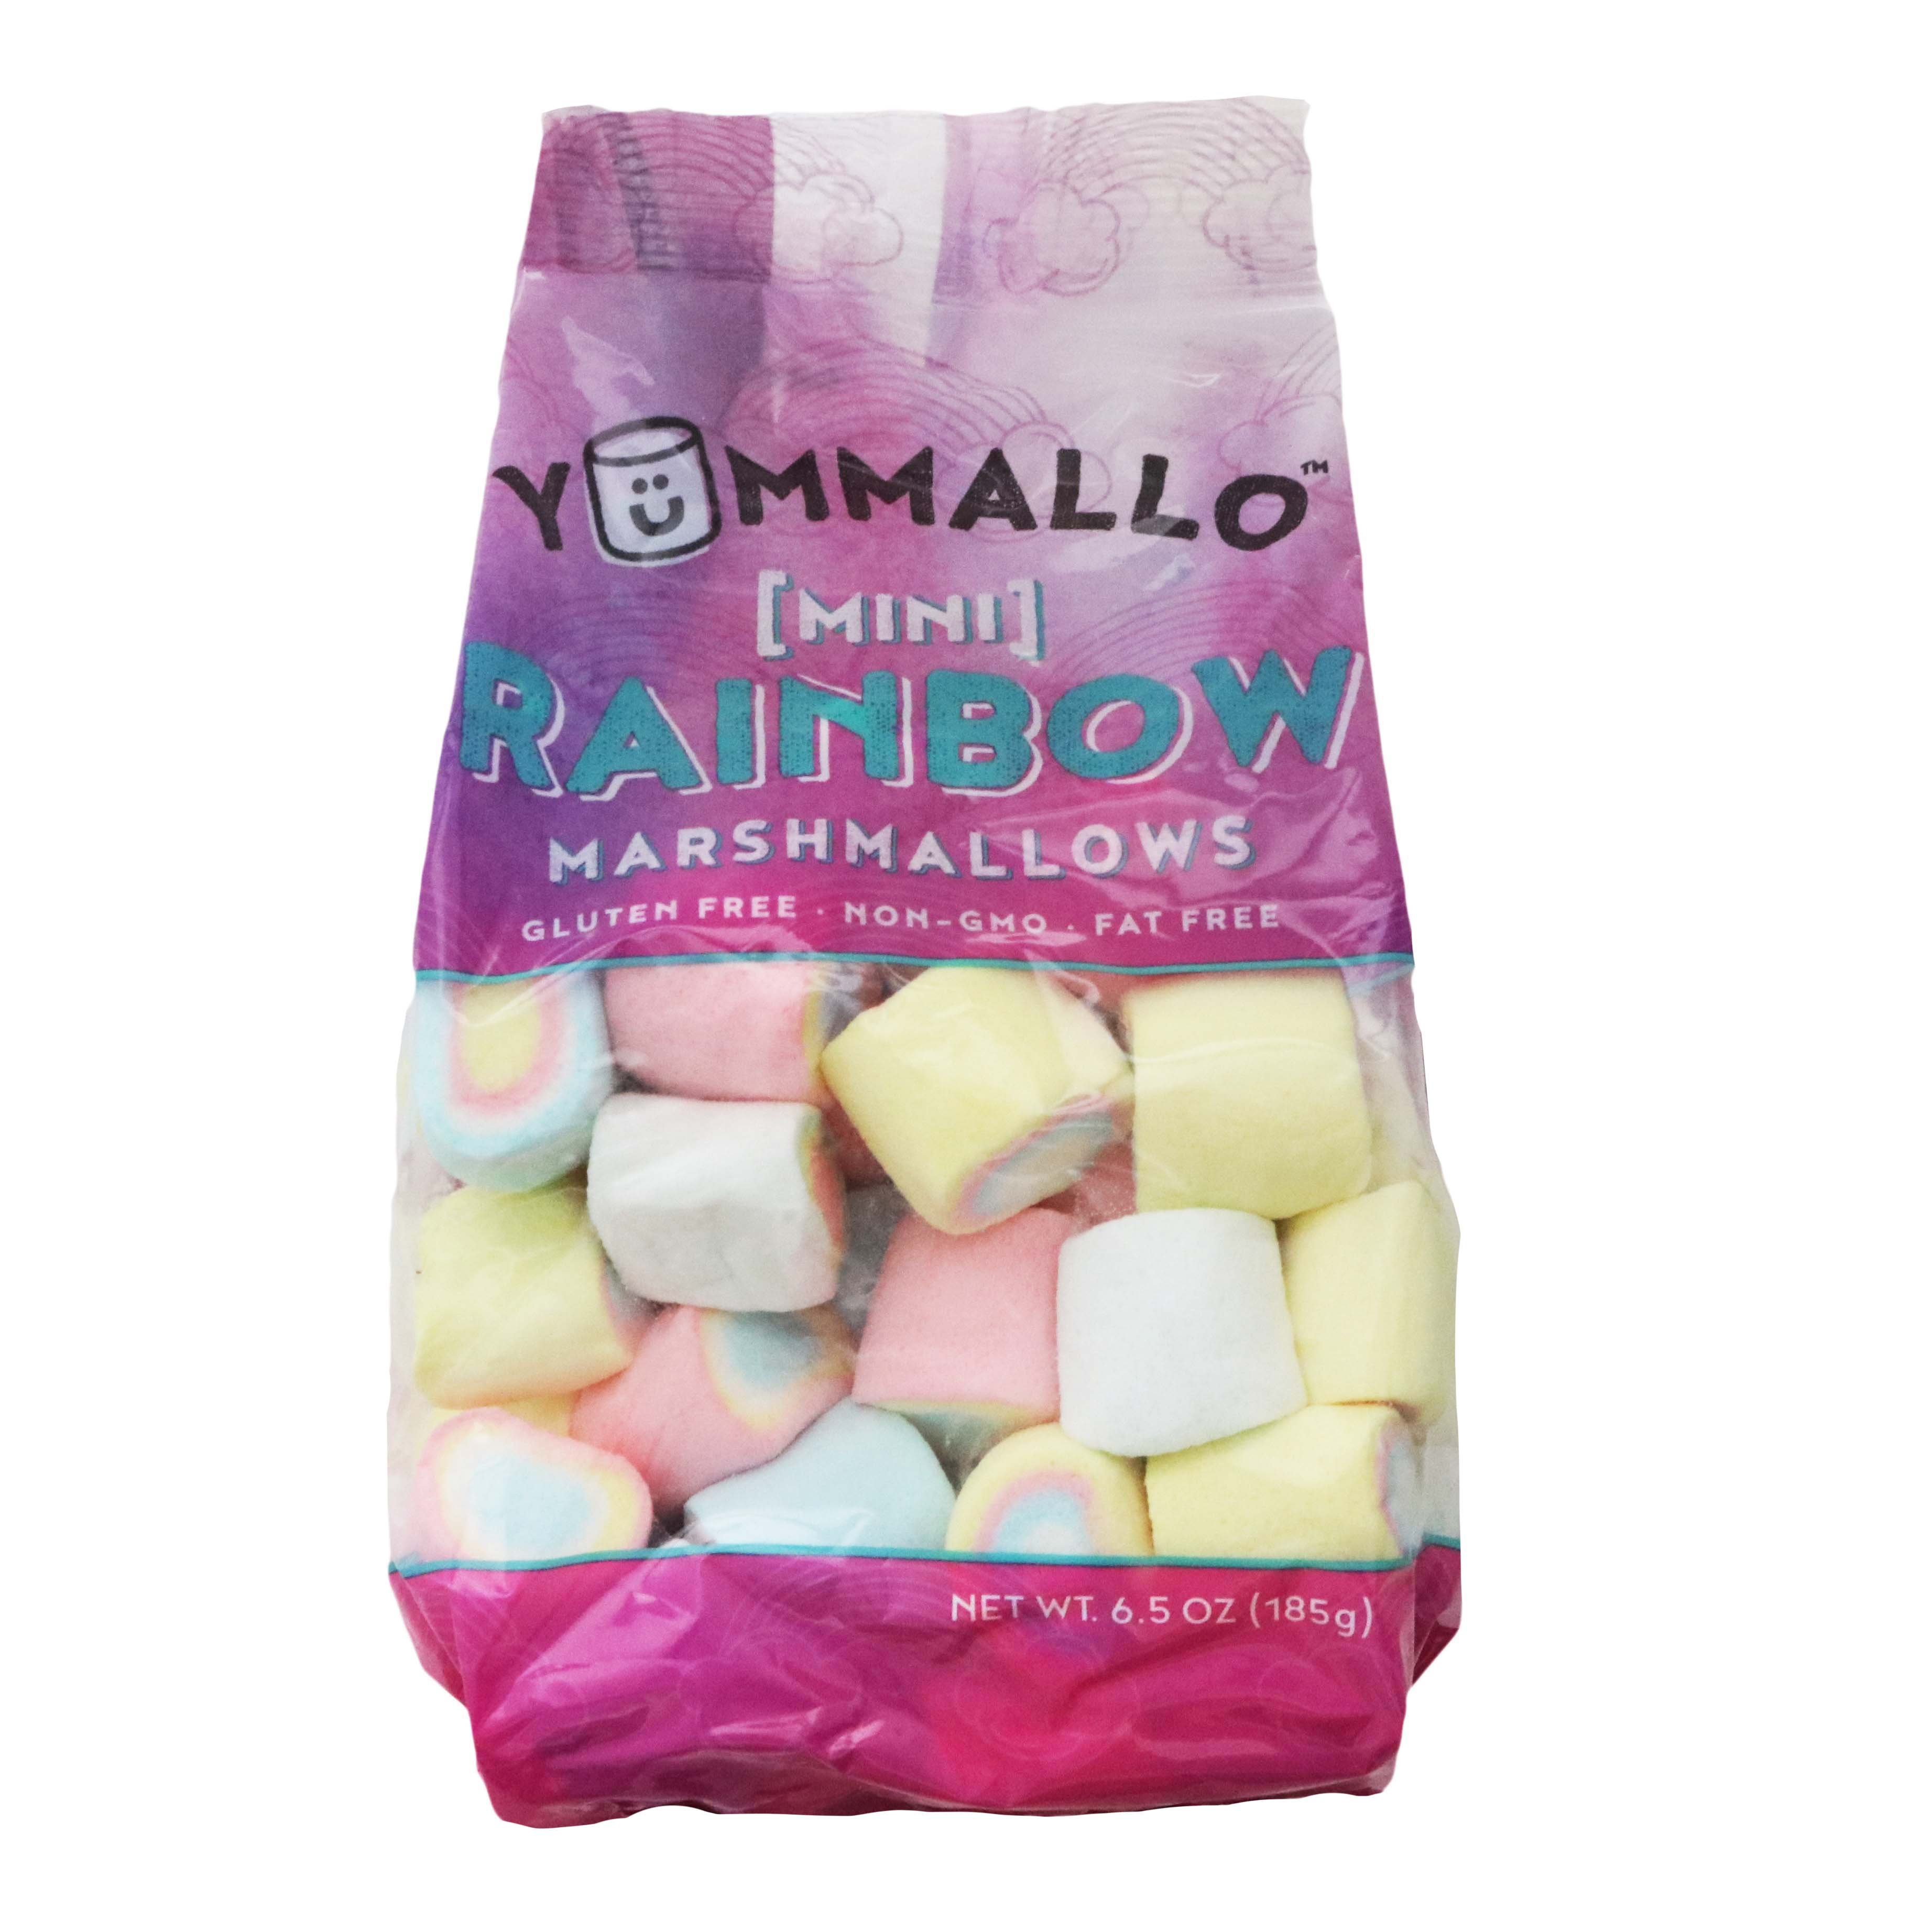 Yummallo Yummix Rainbow Marshmallows, Great for Desserts, Gifts and Easter